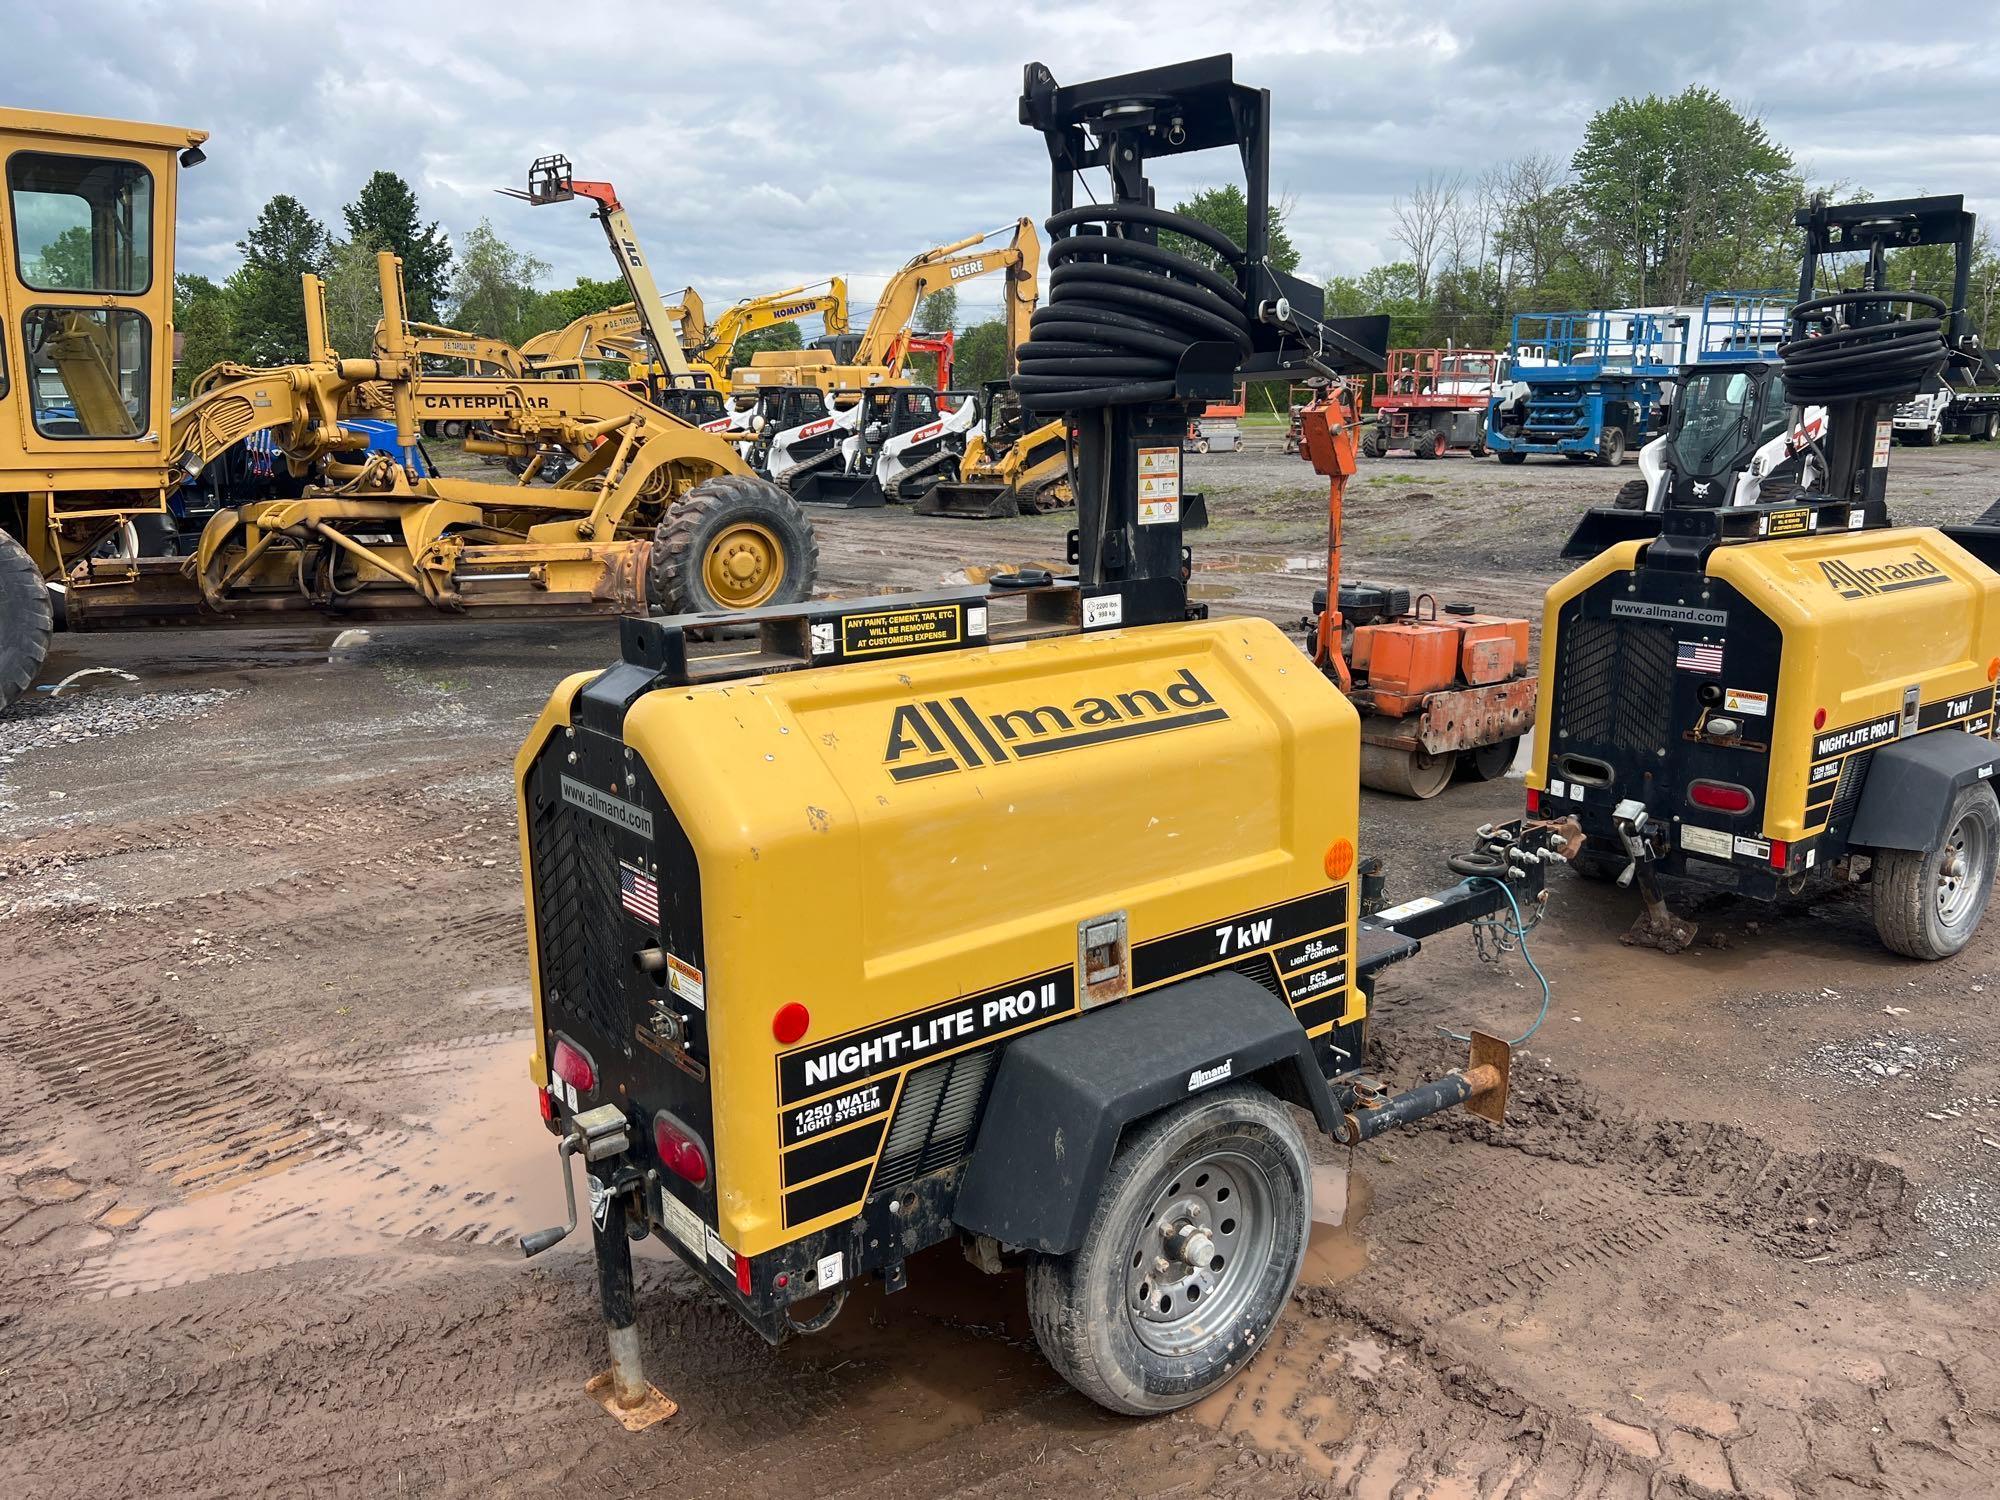 2019 ALLMAND NIGHT LITE PRO LIGHT PLANT SN:2142 powered by diesel engine, equipped with 4-1,000 watt